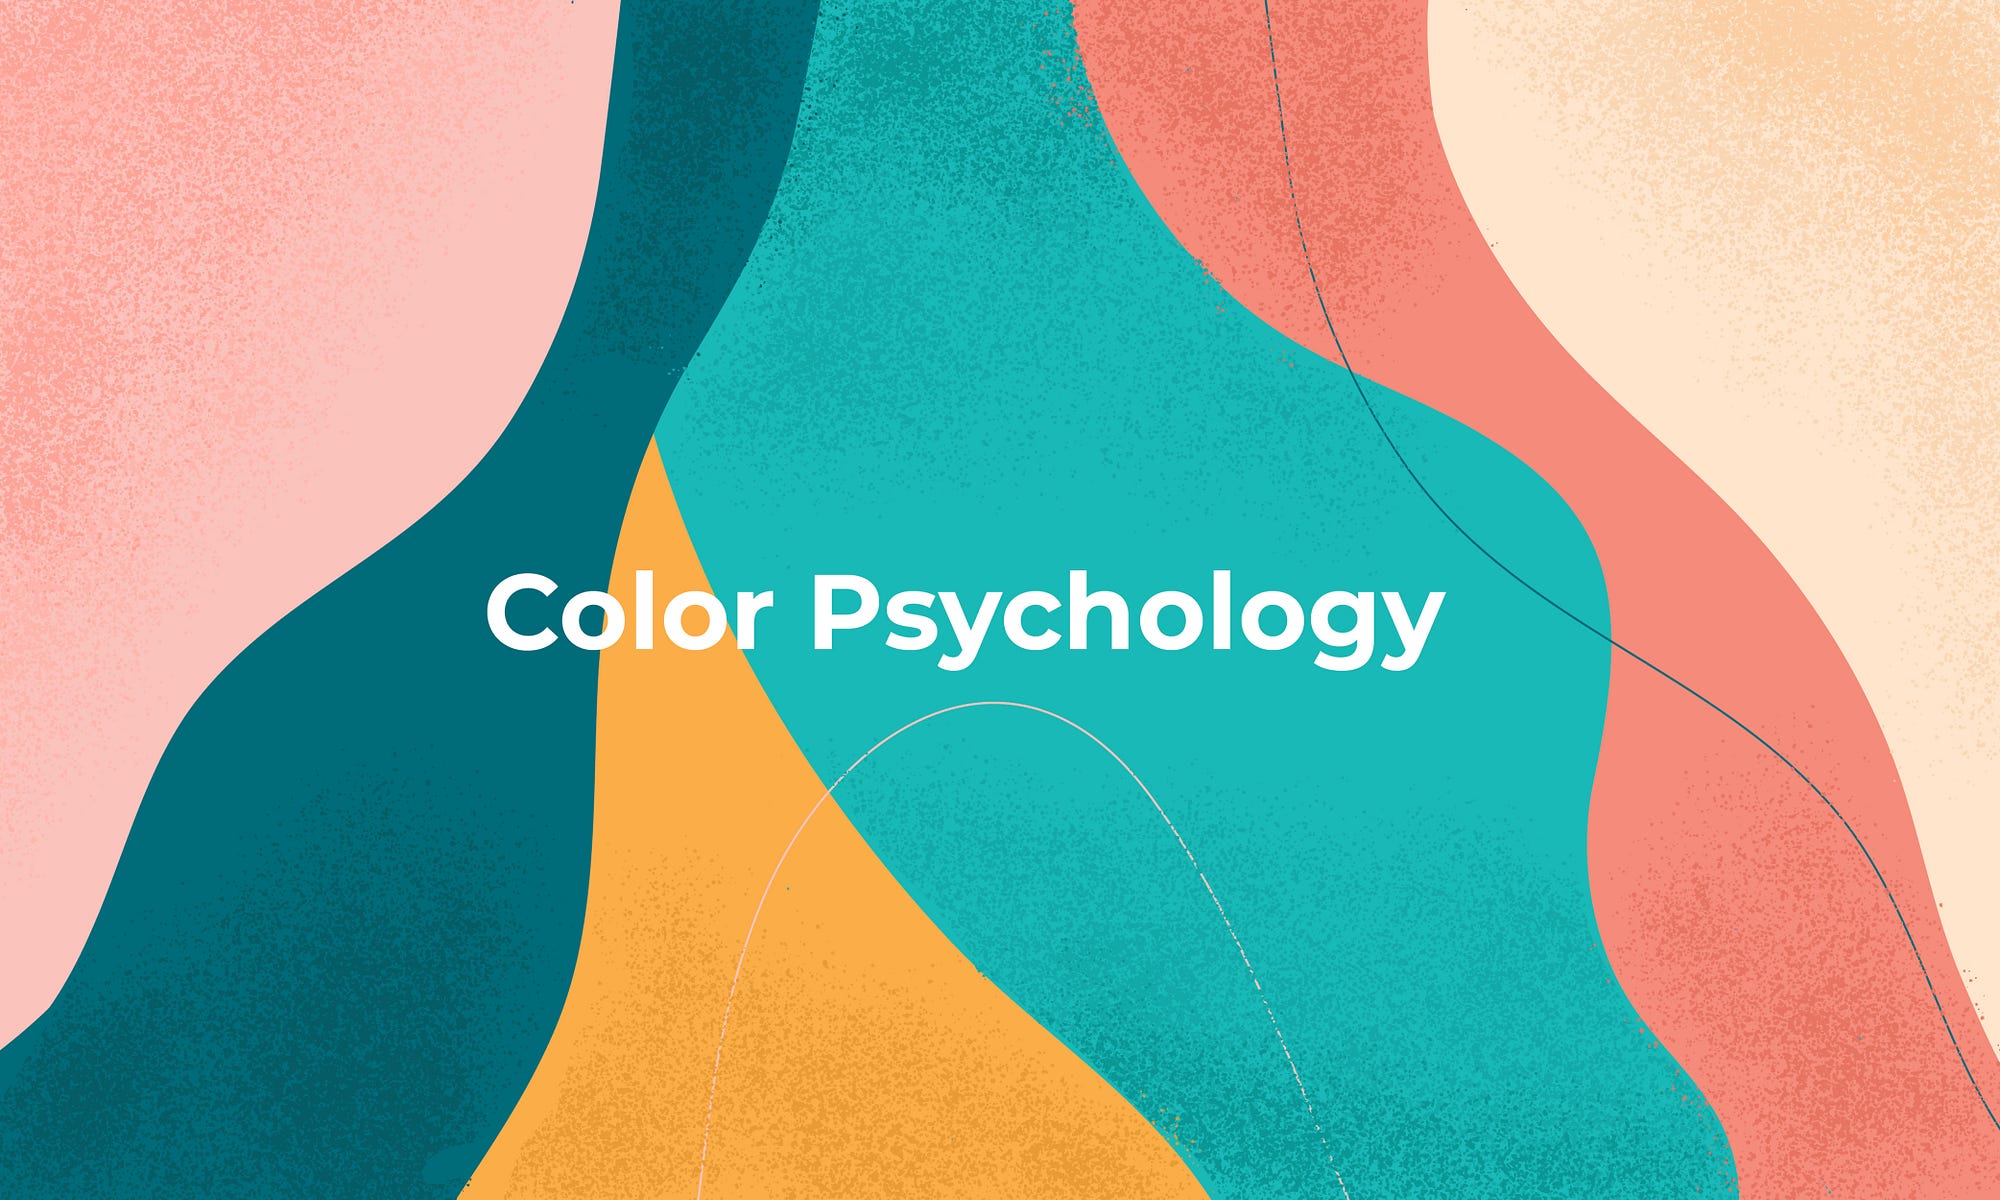 Color psychology and its best practices in UI/UX design